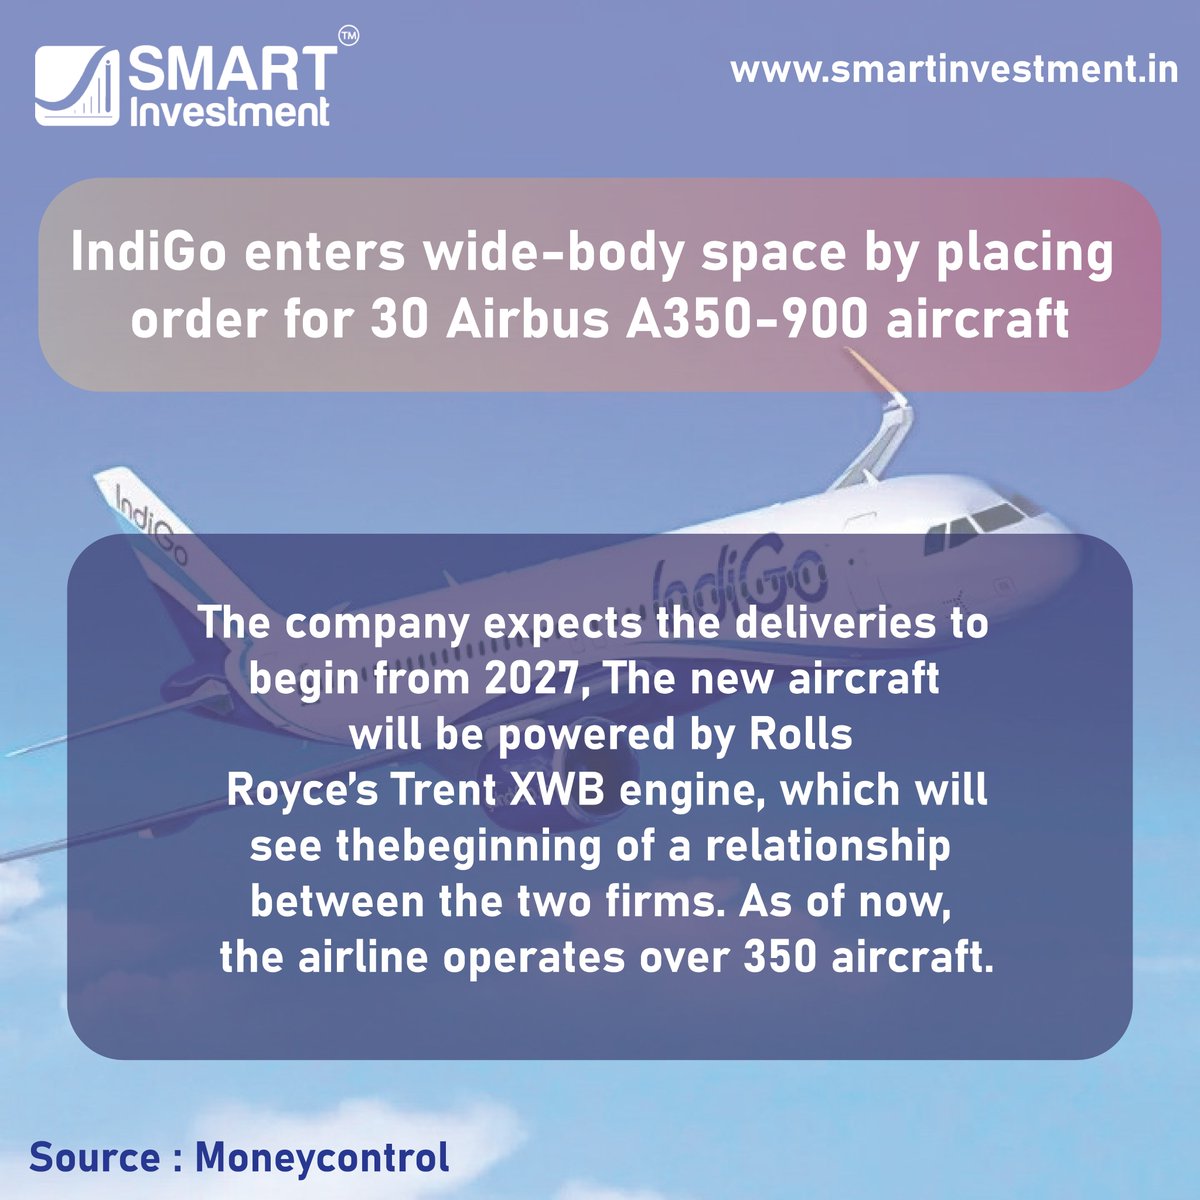 IndiGo enters wide-body space by placing order for 30 Airbus A350-900 aircraft
.
Follow for more
.
#Indigoaircraft #Indigoair #sharemarket #investments #financial #analysis
#smartinvestment #financialnewspaper #stockmarket
#newspaper #news #resultimpact